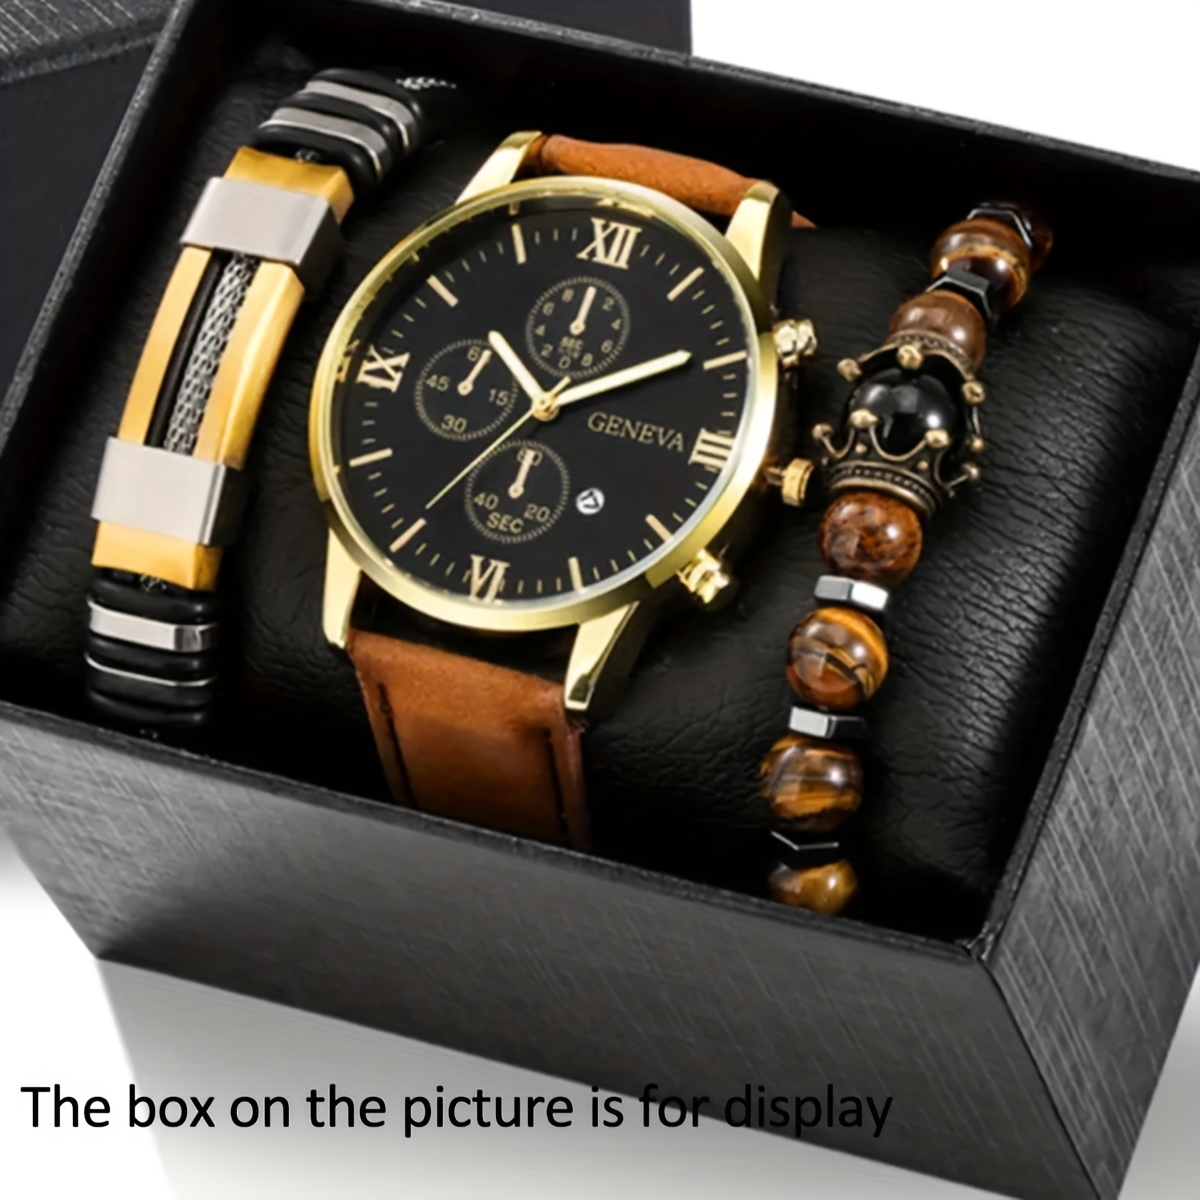 

3pcs/set Men's Casual Analog Watches And Analog Bracelets, Ideal Choice For Gifts